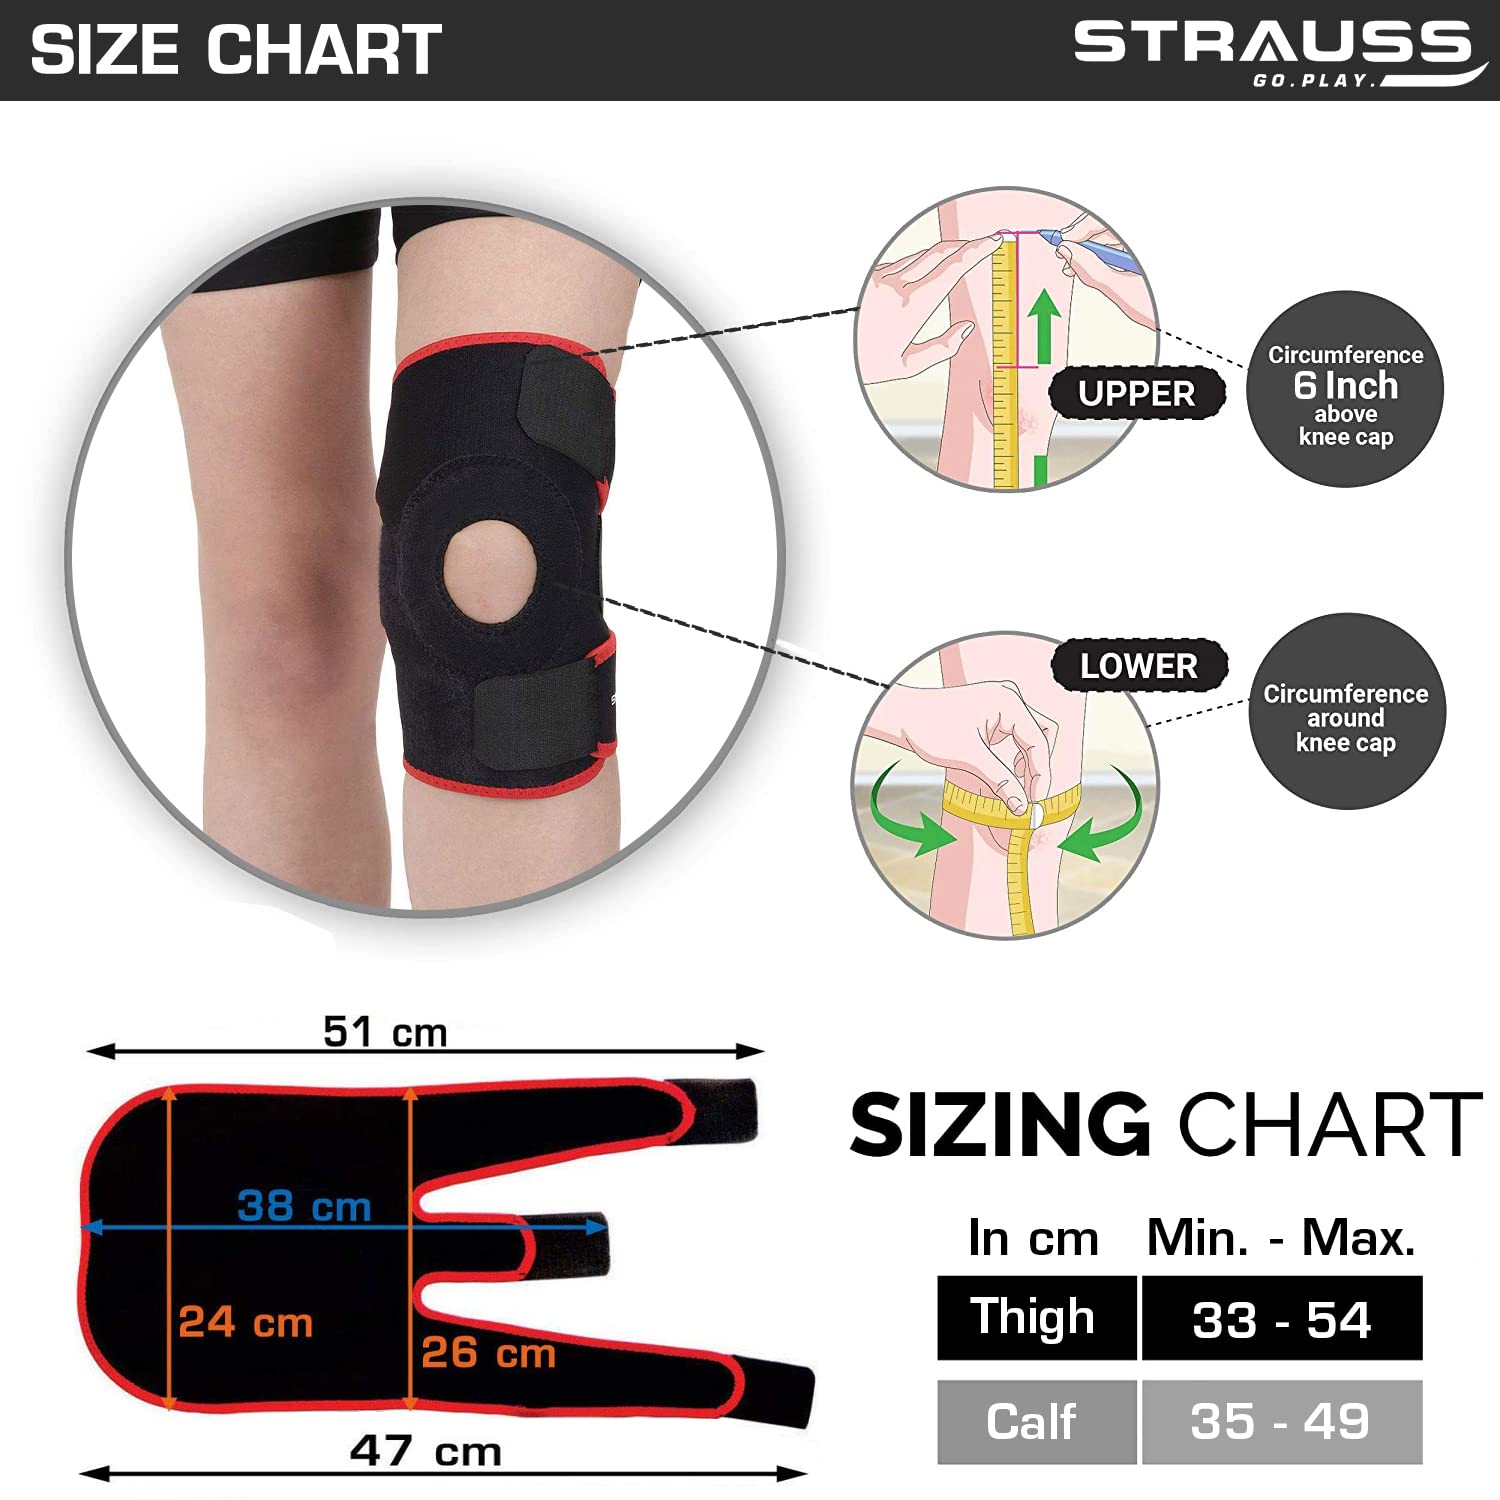 STRAUSS Adjustable Knee Support Patella | Breathable Knee Cap for Knee Pain, Gym Workout, Running, Arthritis and Protection | Knee Brace for Knee Pain Relief | For Men and Women | Size: Free Size, (Black/Red)